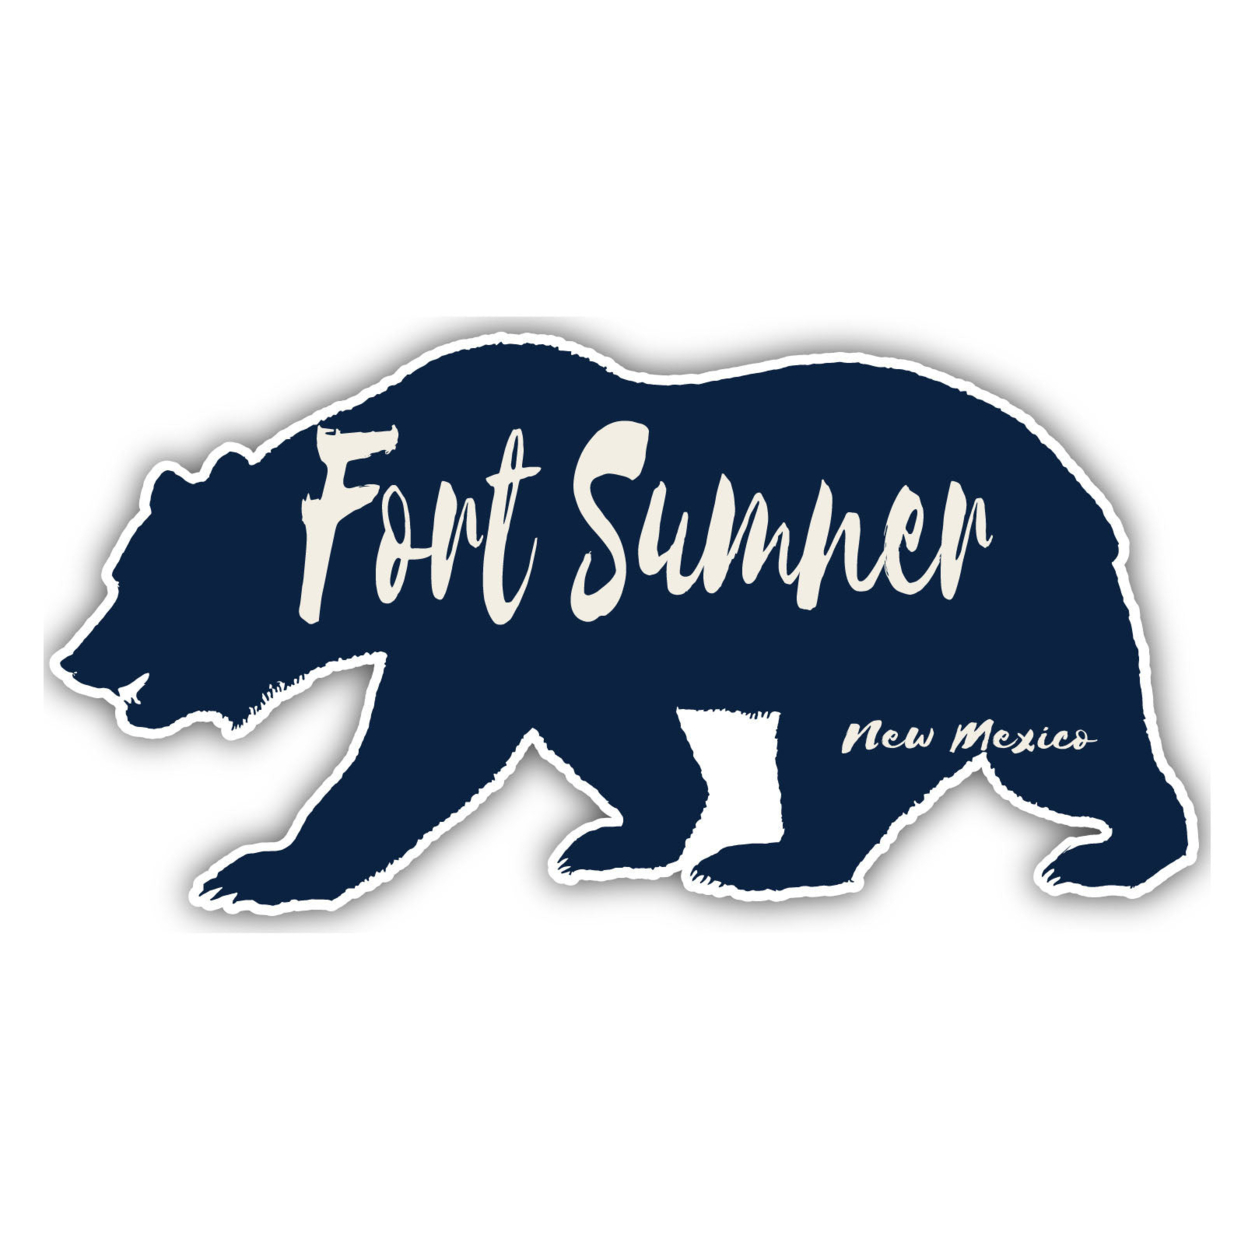 Fort Sumner New Mexico Souvenir Decorative Stickers (Choose Theme And Size) - Single Unit, 4-Inch, Bear